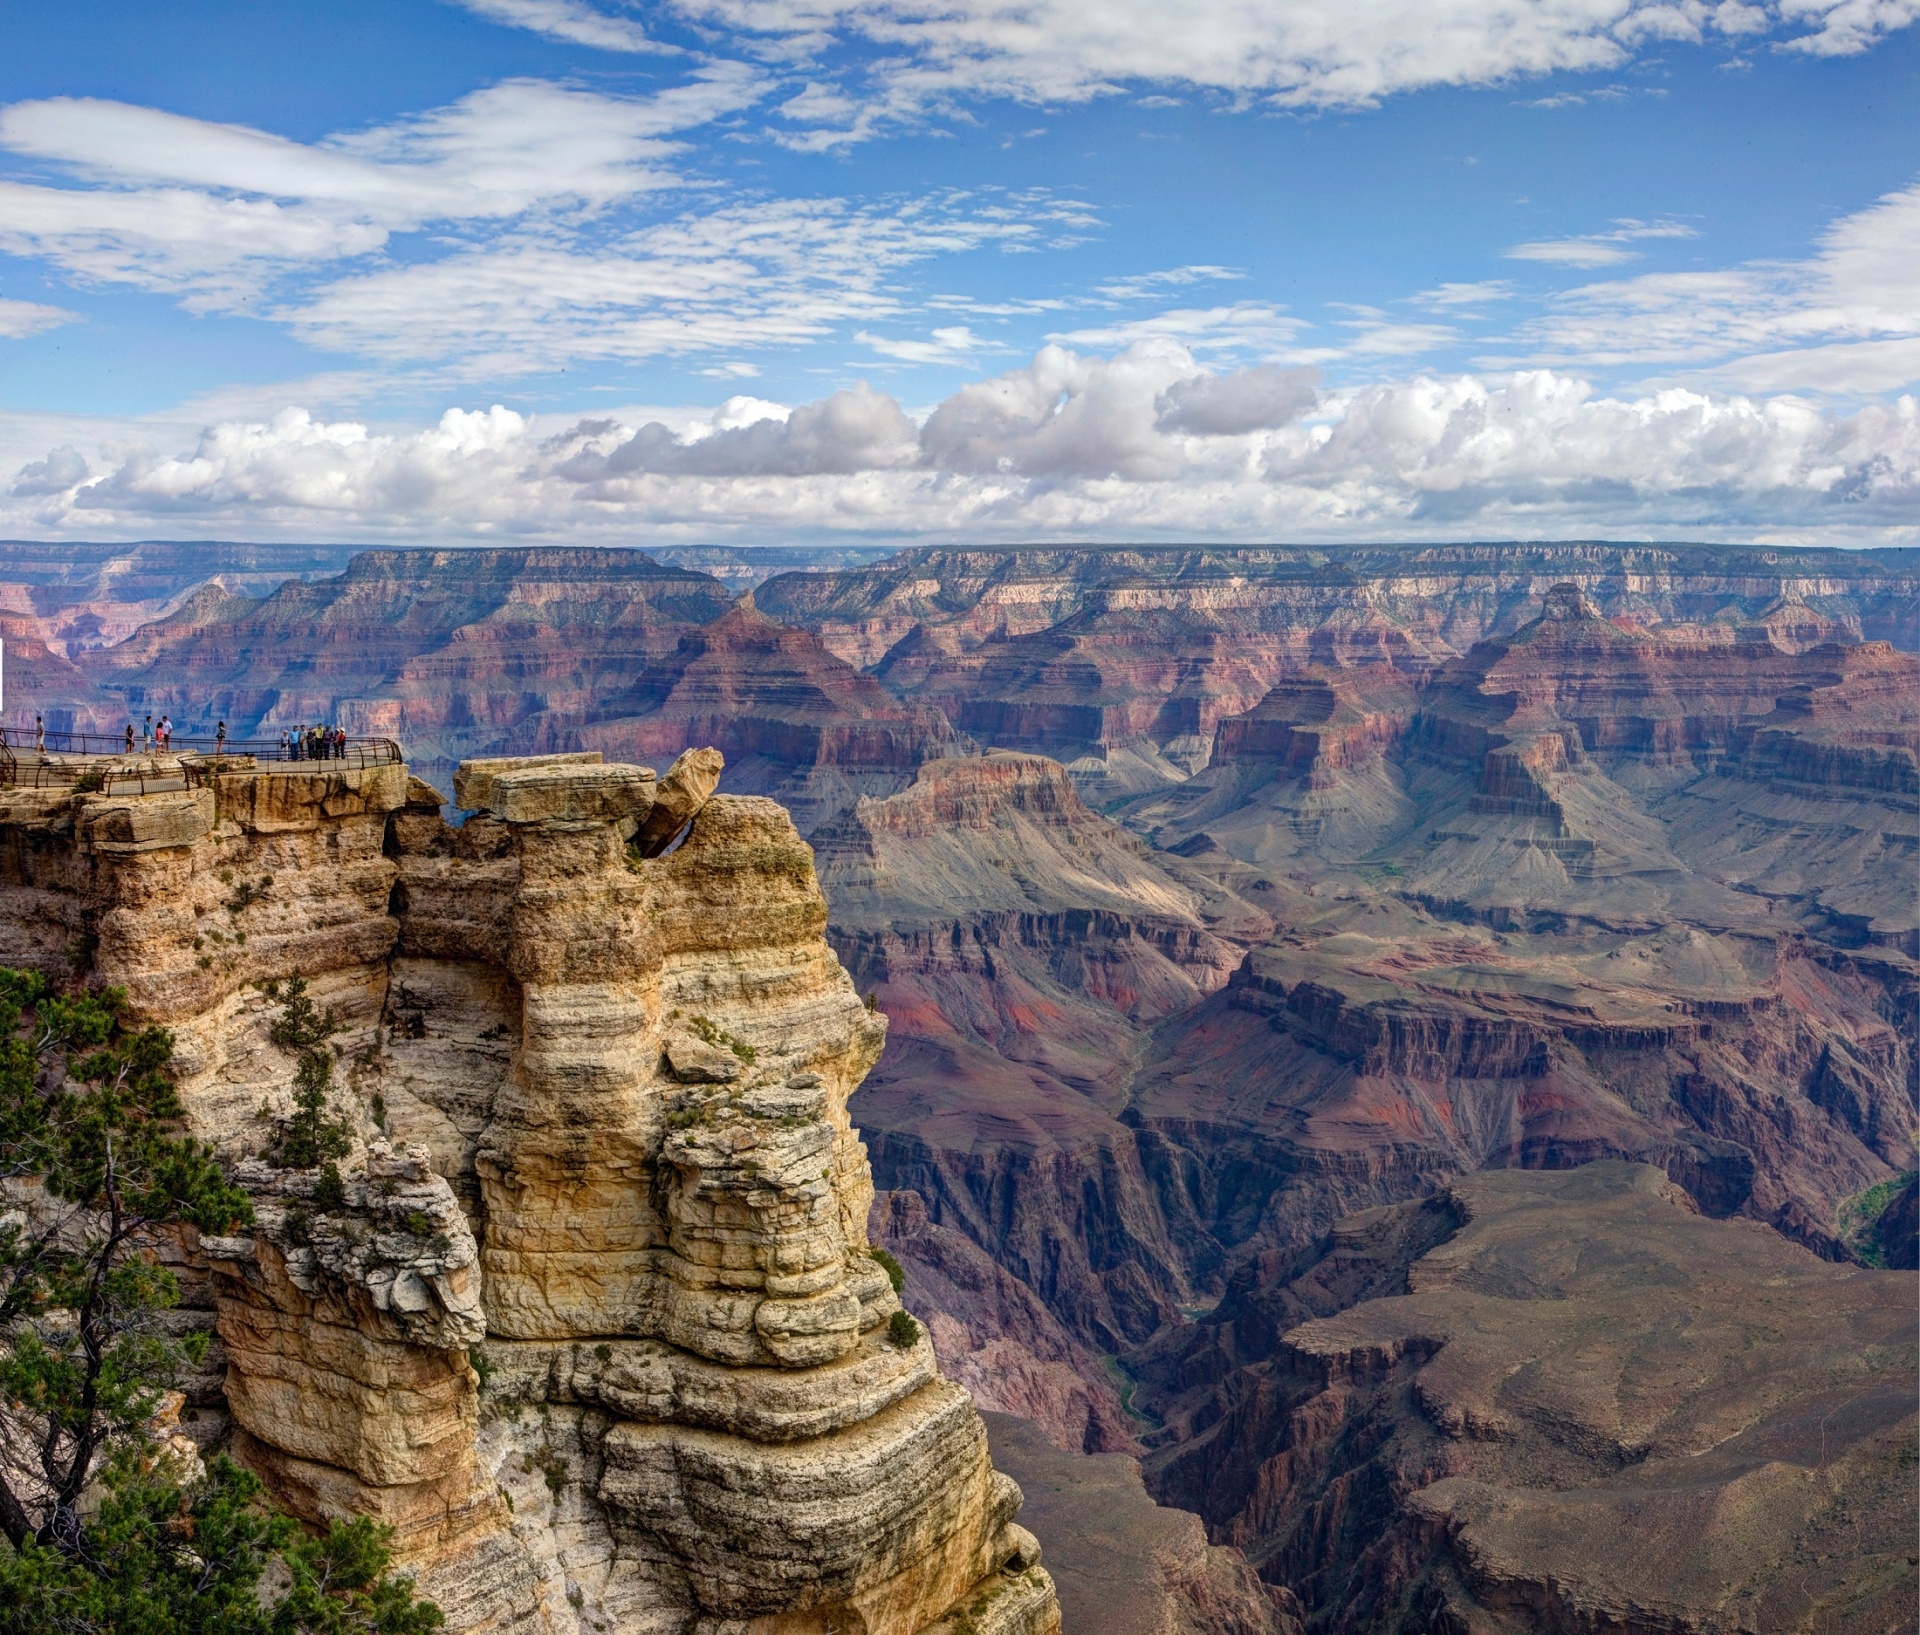 Landscape of the Grand Canyon